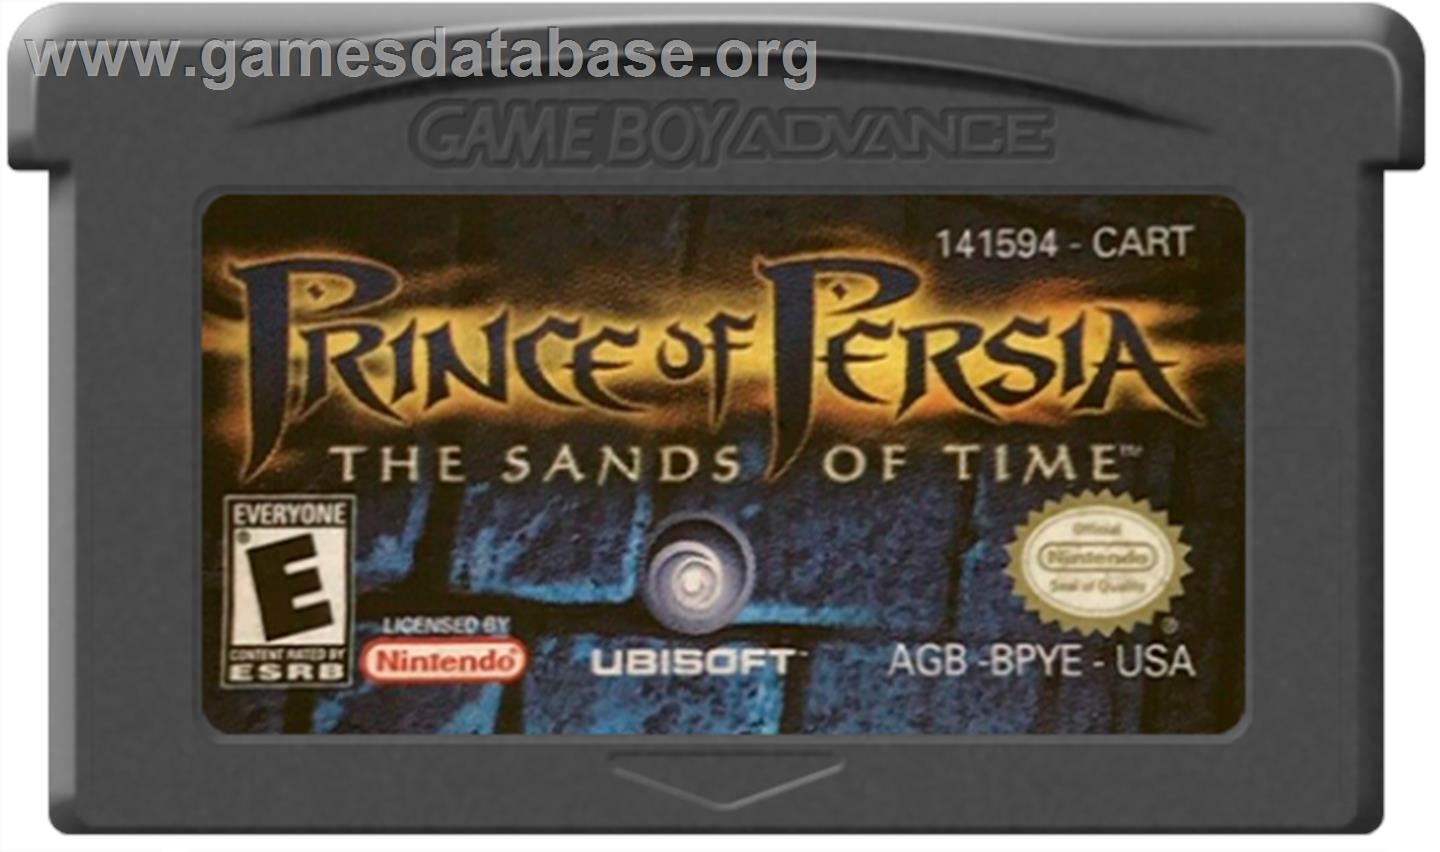 Prince of Persia: The Sands of Time - Nintendo Game Boy Advance - Artwork - Cartridge